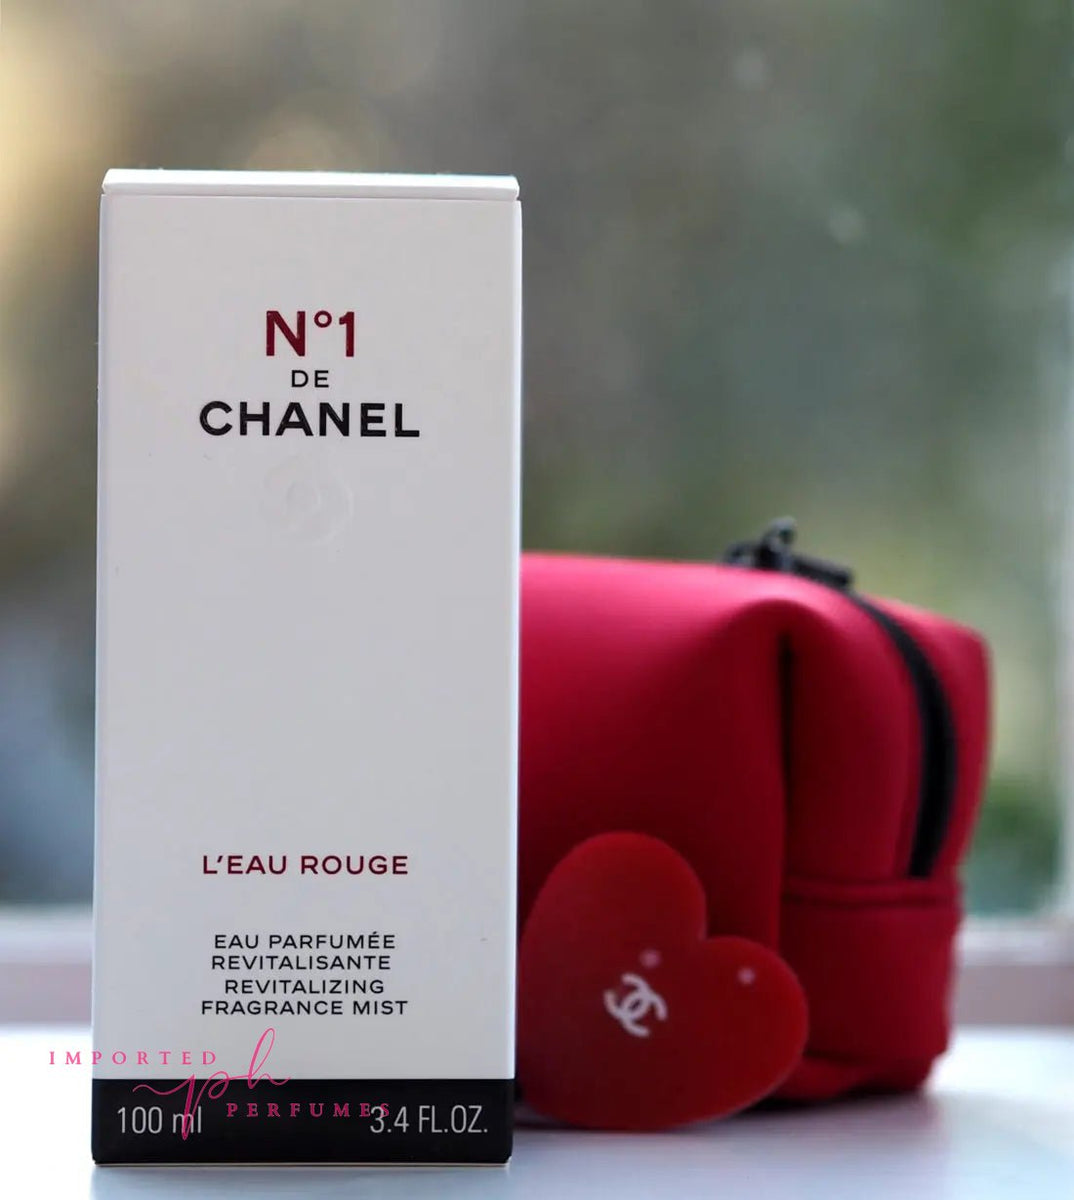 chanel perfume l' eau rouge comes with box